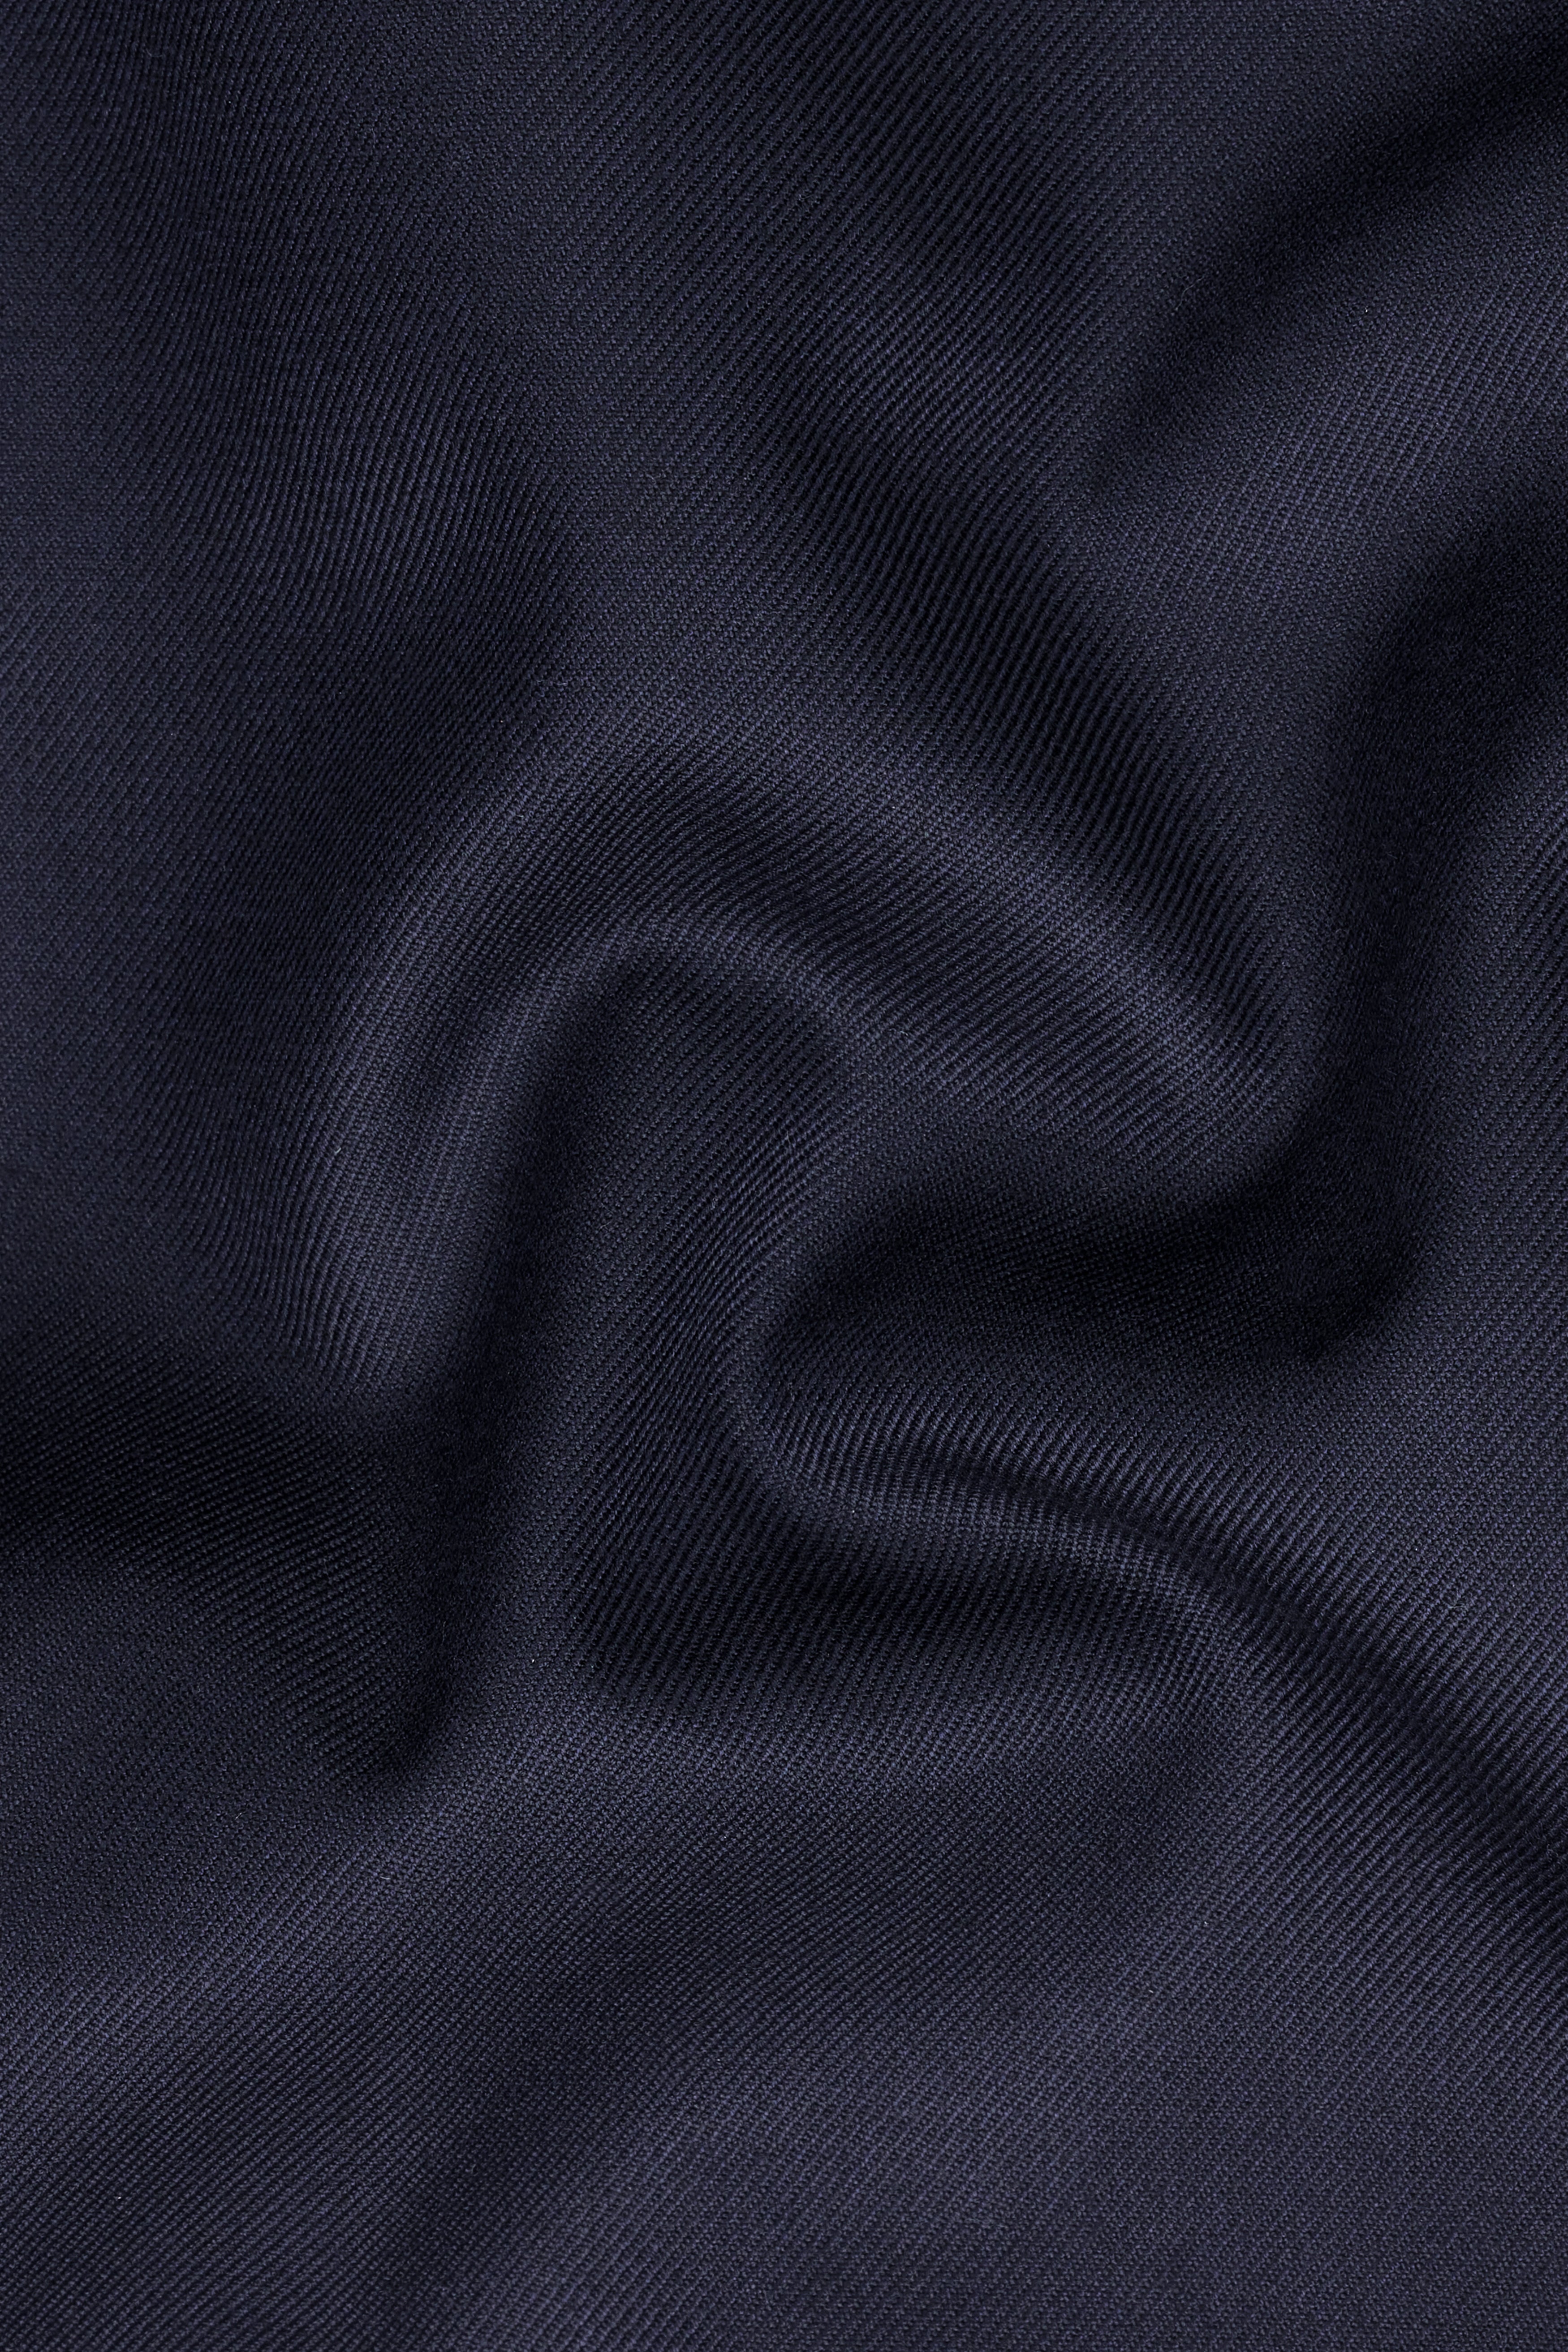 Mirage Blue Wool Rich Double Breasted Suit ST2727-DB-36,ST2727-DB-38,ST2727-DB-40,ST2727-DB-42,ST2727-DB-44,ST2727-DB-46,ST2727-DB-48,ST2727-DB-50,ST2727-DB-52,ST2727-DB-54,ST2727-DB-56,ST2727-DB-58,ST2727-DB-60